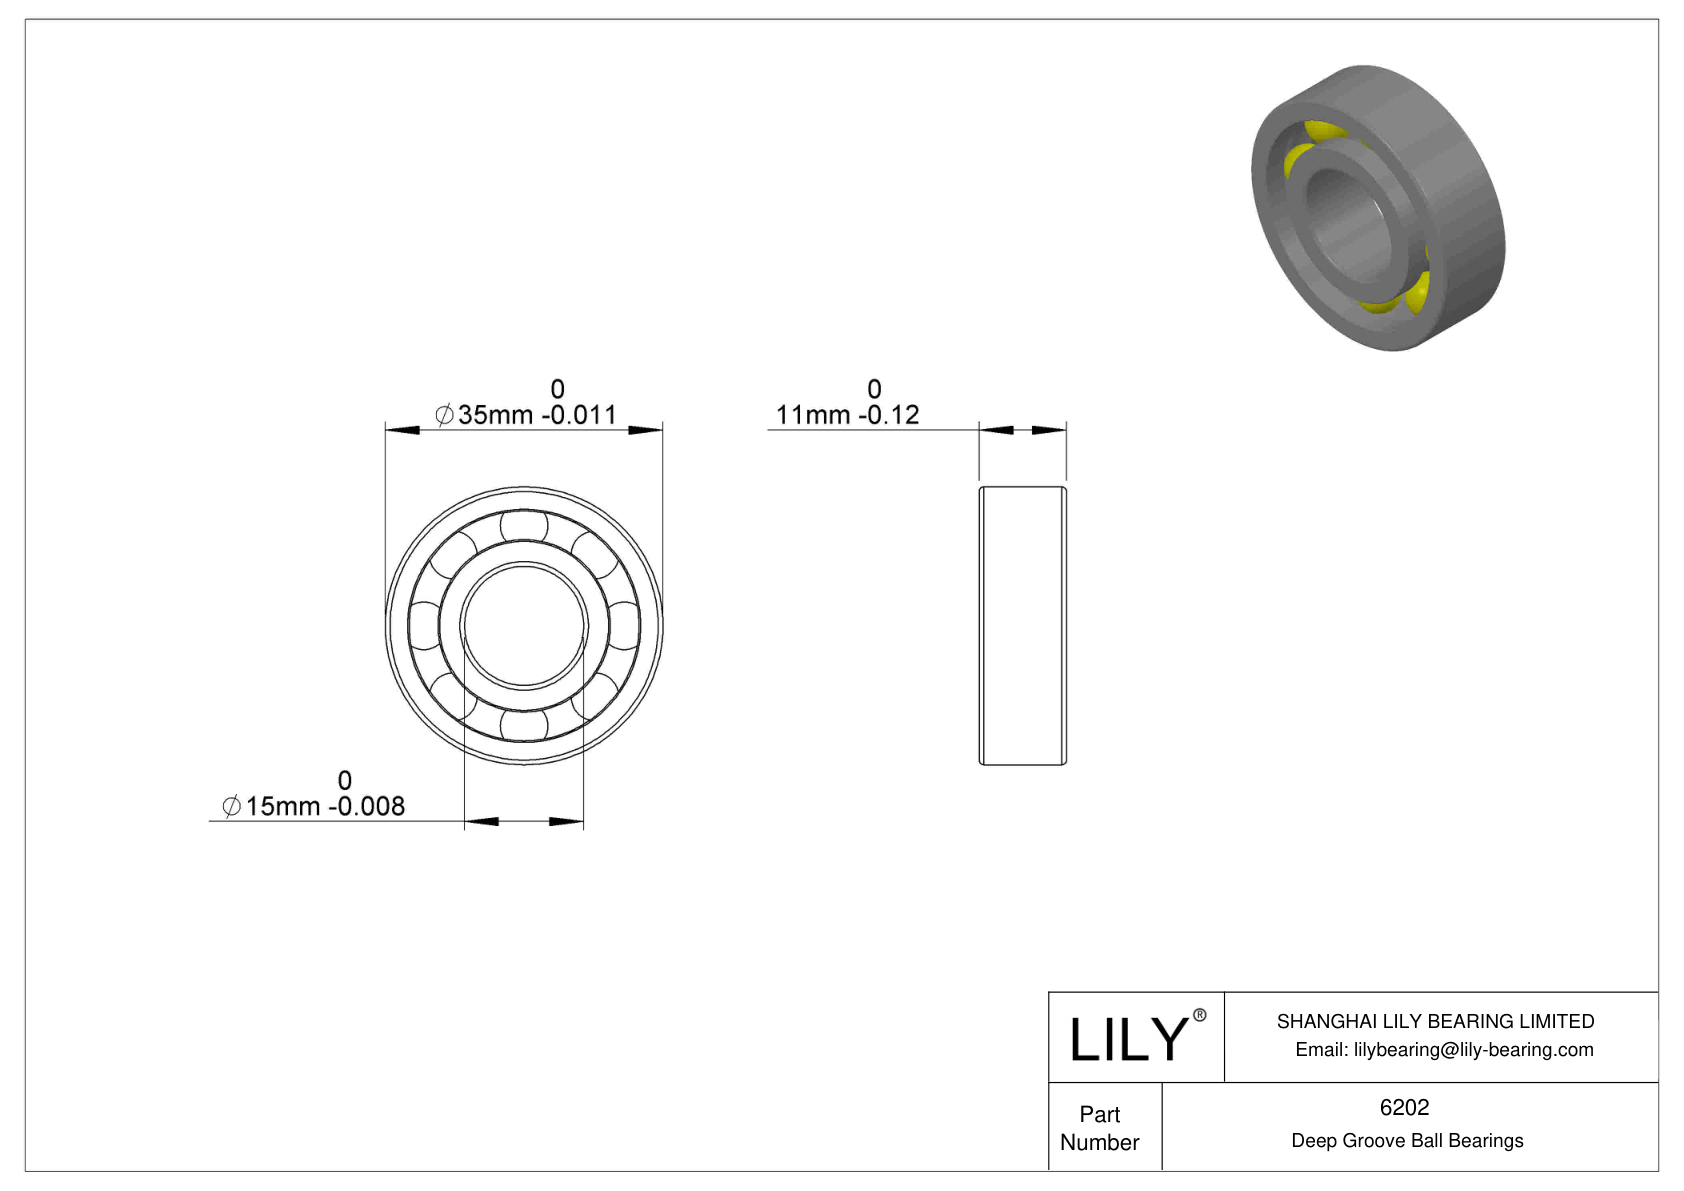 LILY-PU620138-10C5L12M10 Polyurethane Coated Bearing With Screw cad drawing